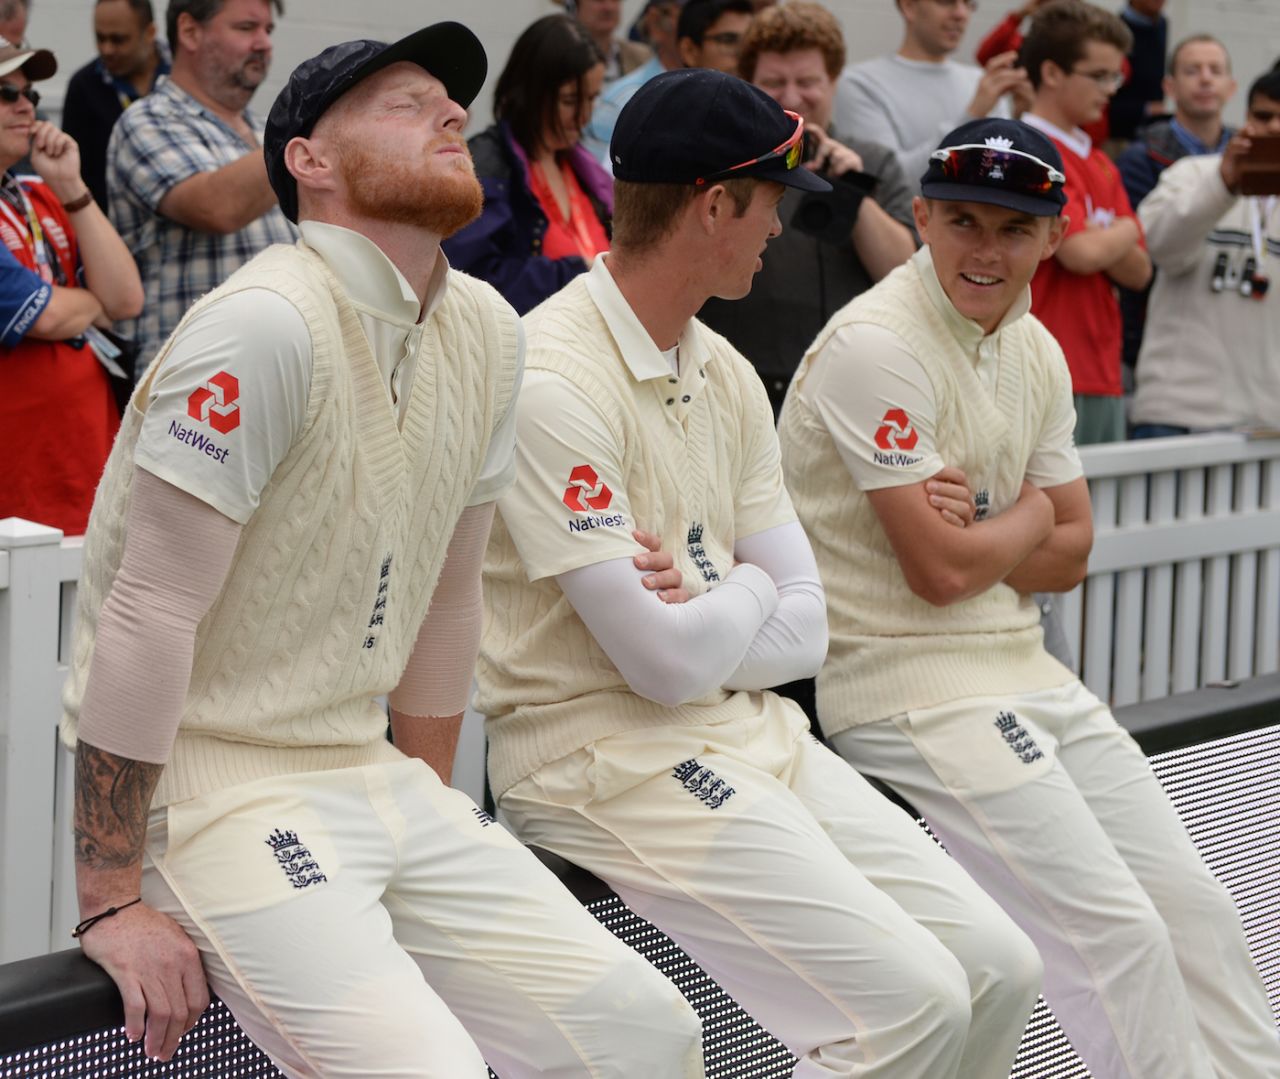 Ben Stokes, Keaton Jennings and Sam Curran, England v India, 5th Test, The Oval, 2nd day, September 8, 2018